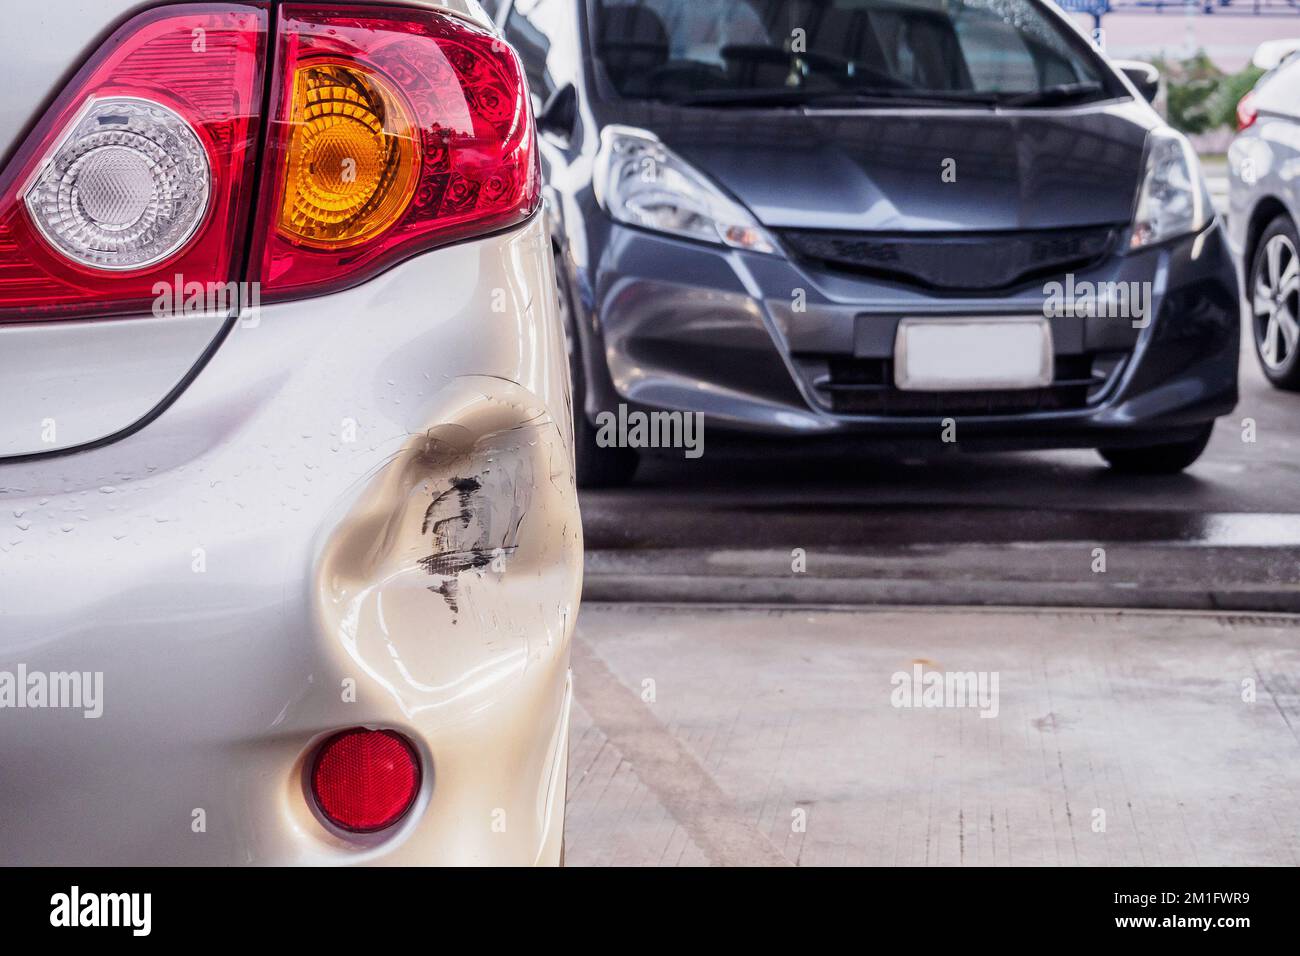 car has dented rear bumper damaged after accident Stock Photo